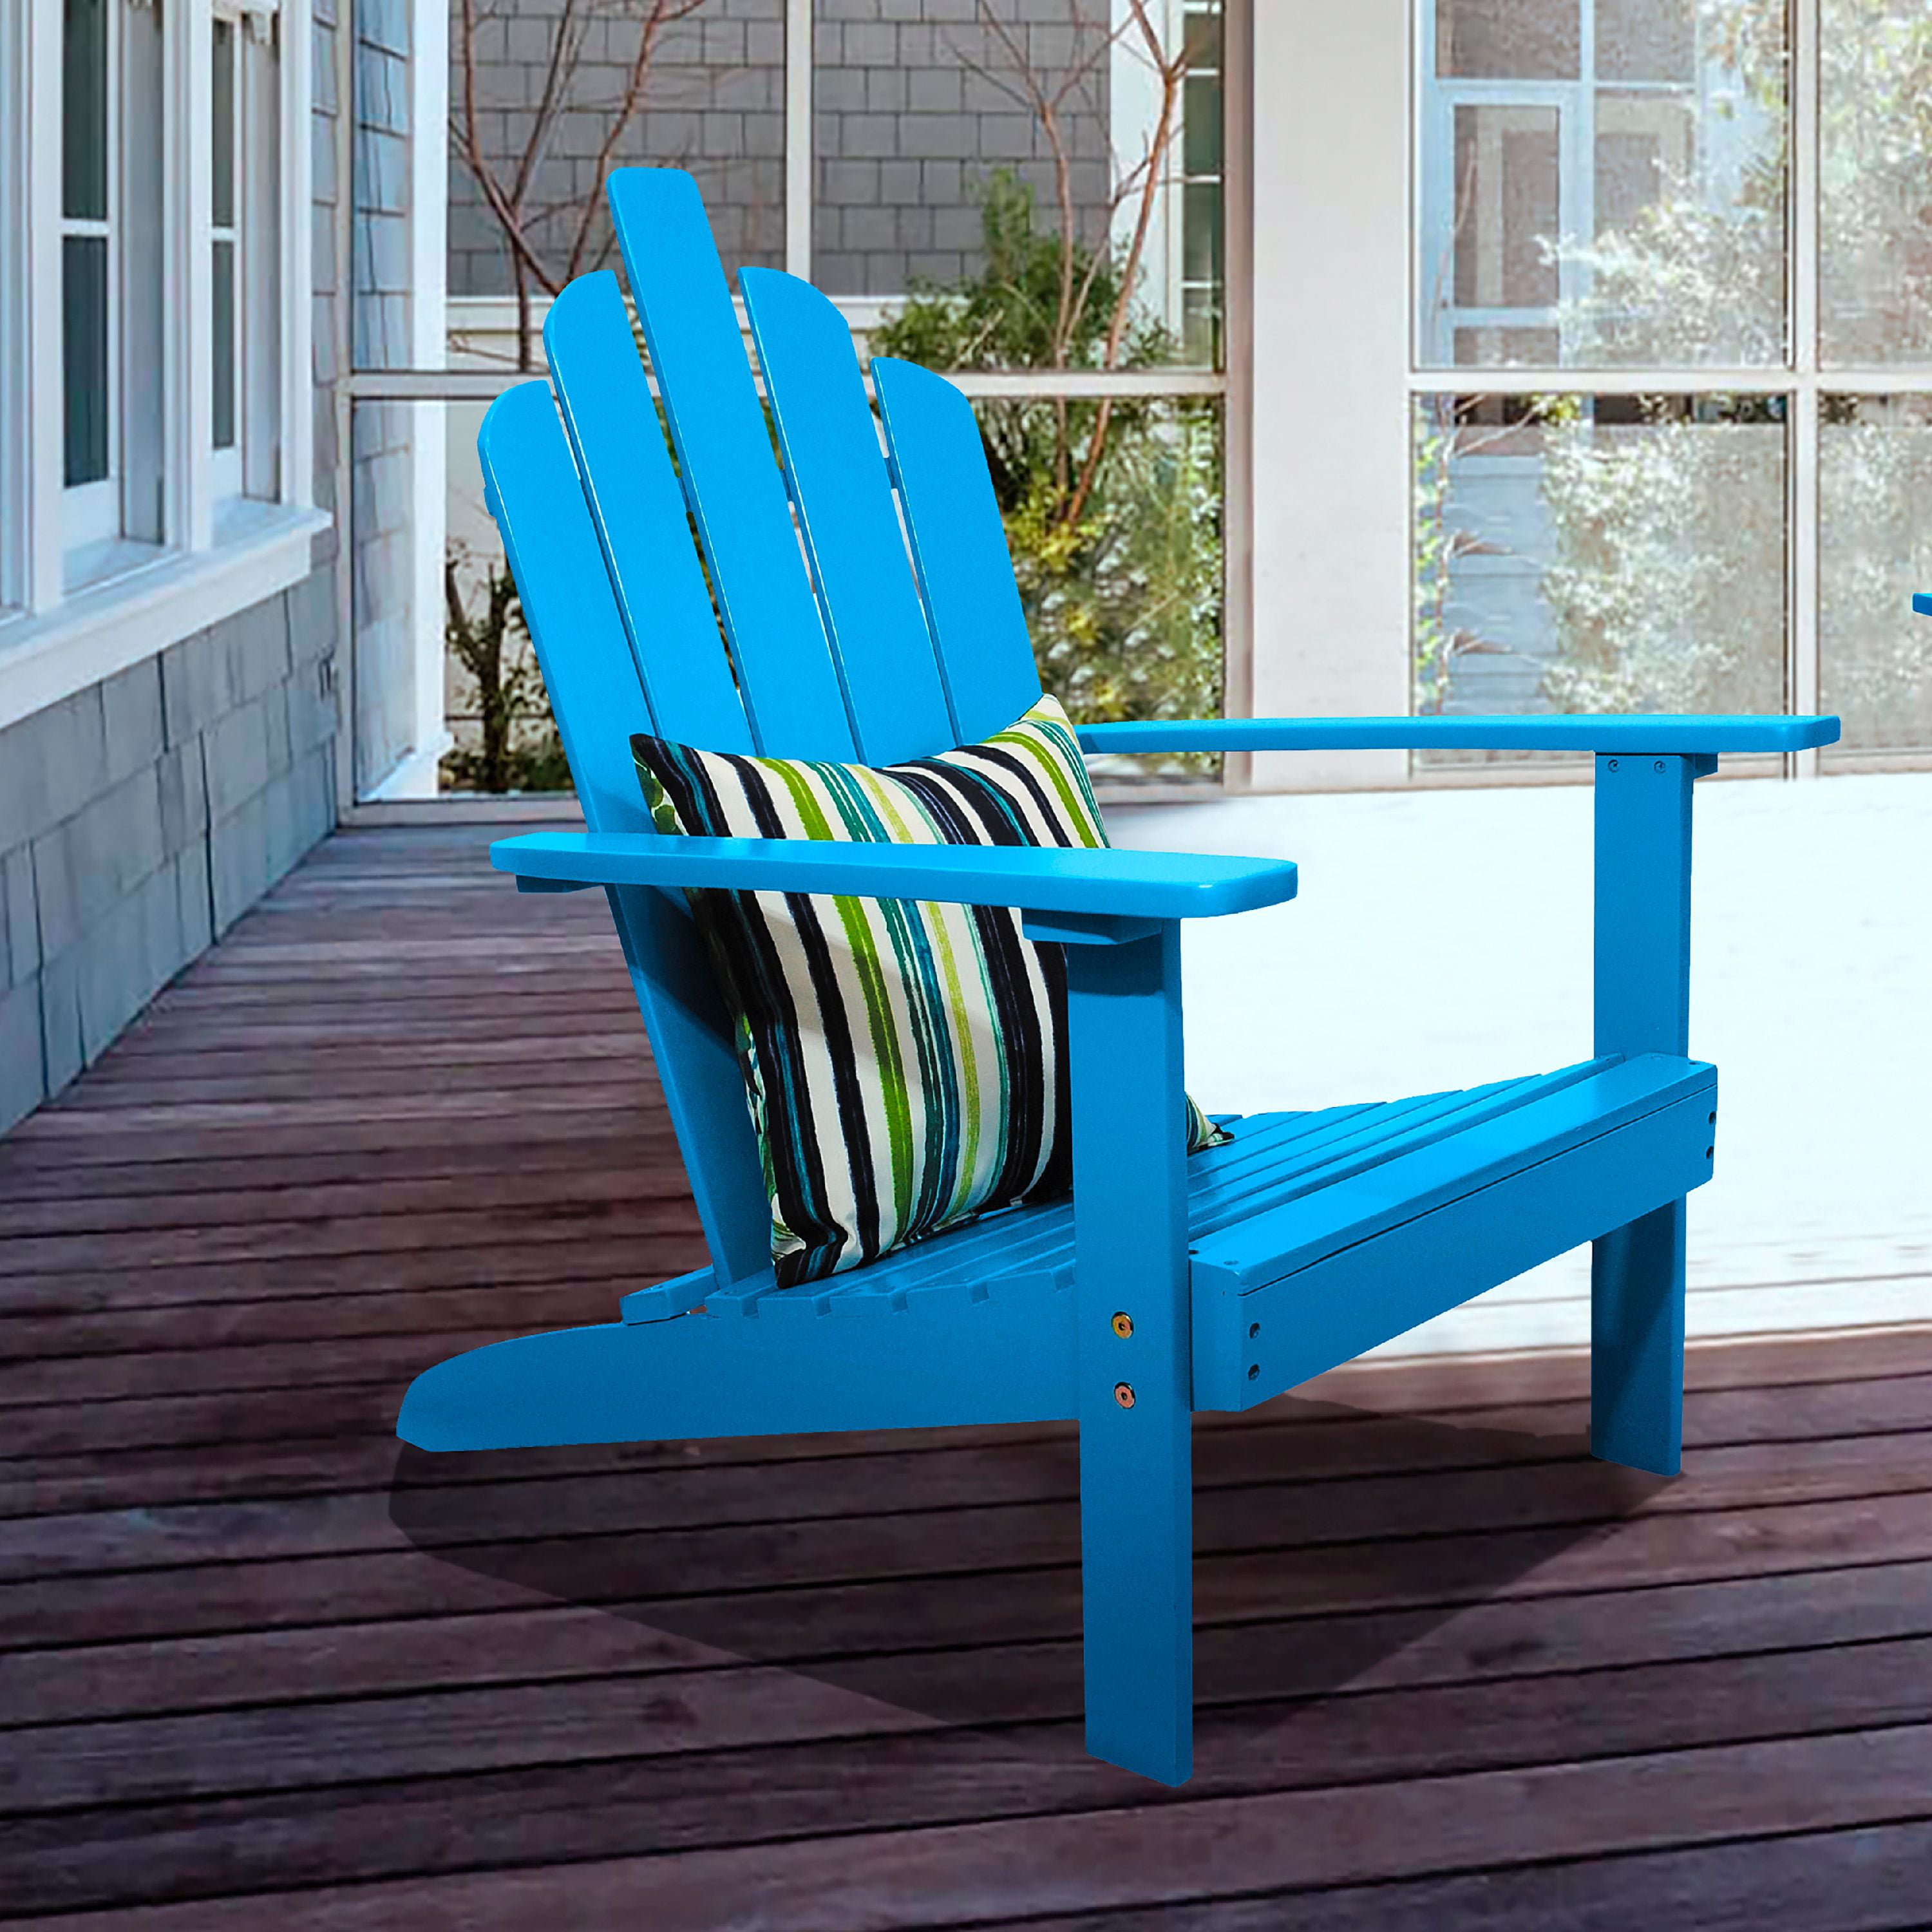 Bellville Outdoor Patio Wood Adirondack Chair, Turquoise 